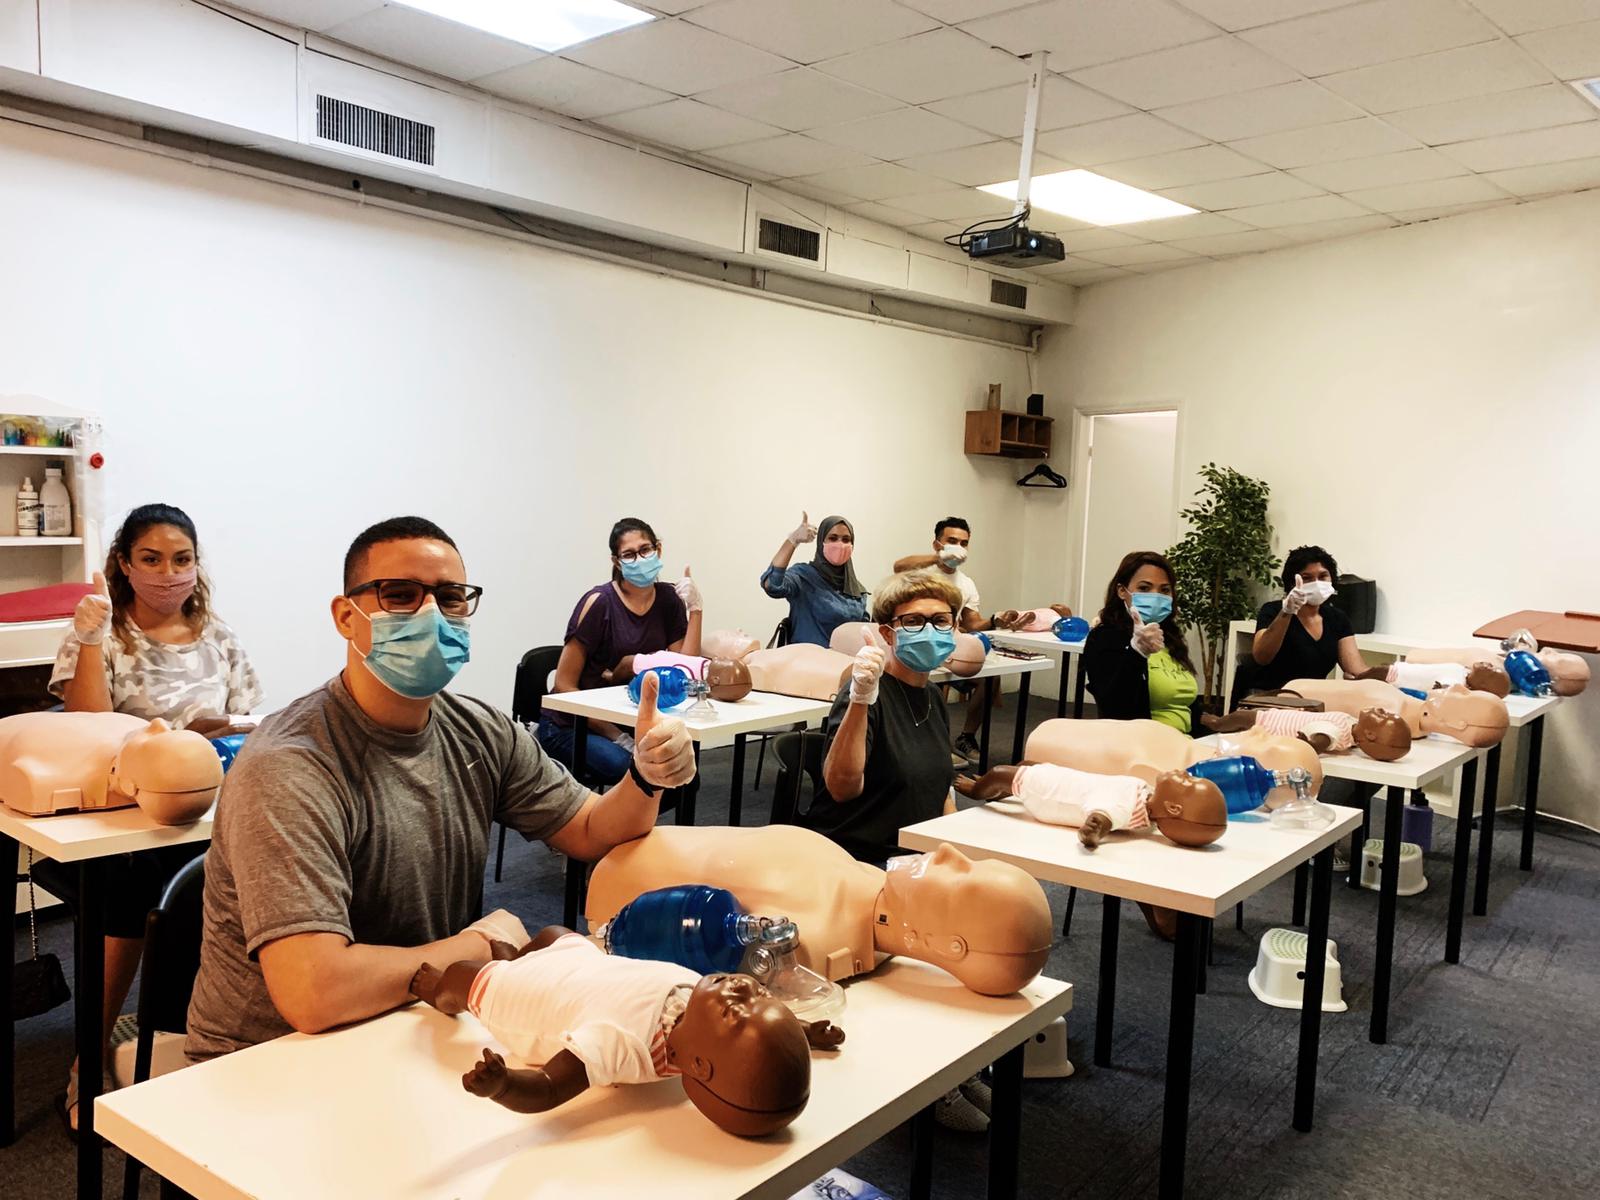 BLS/CPR with PPE’s